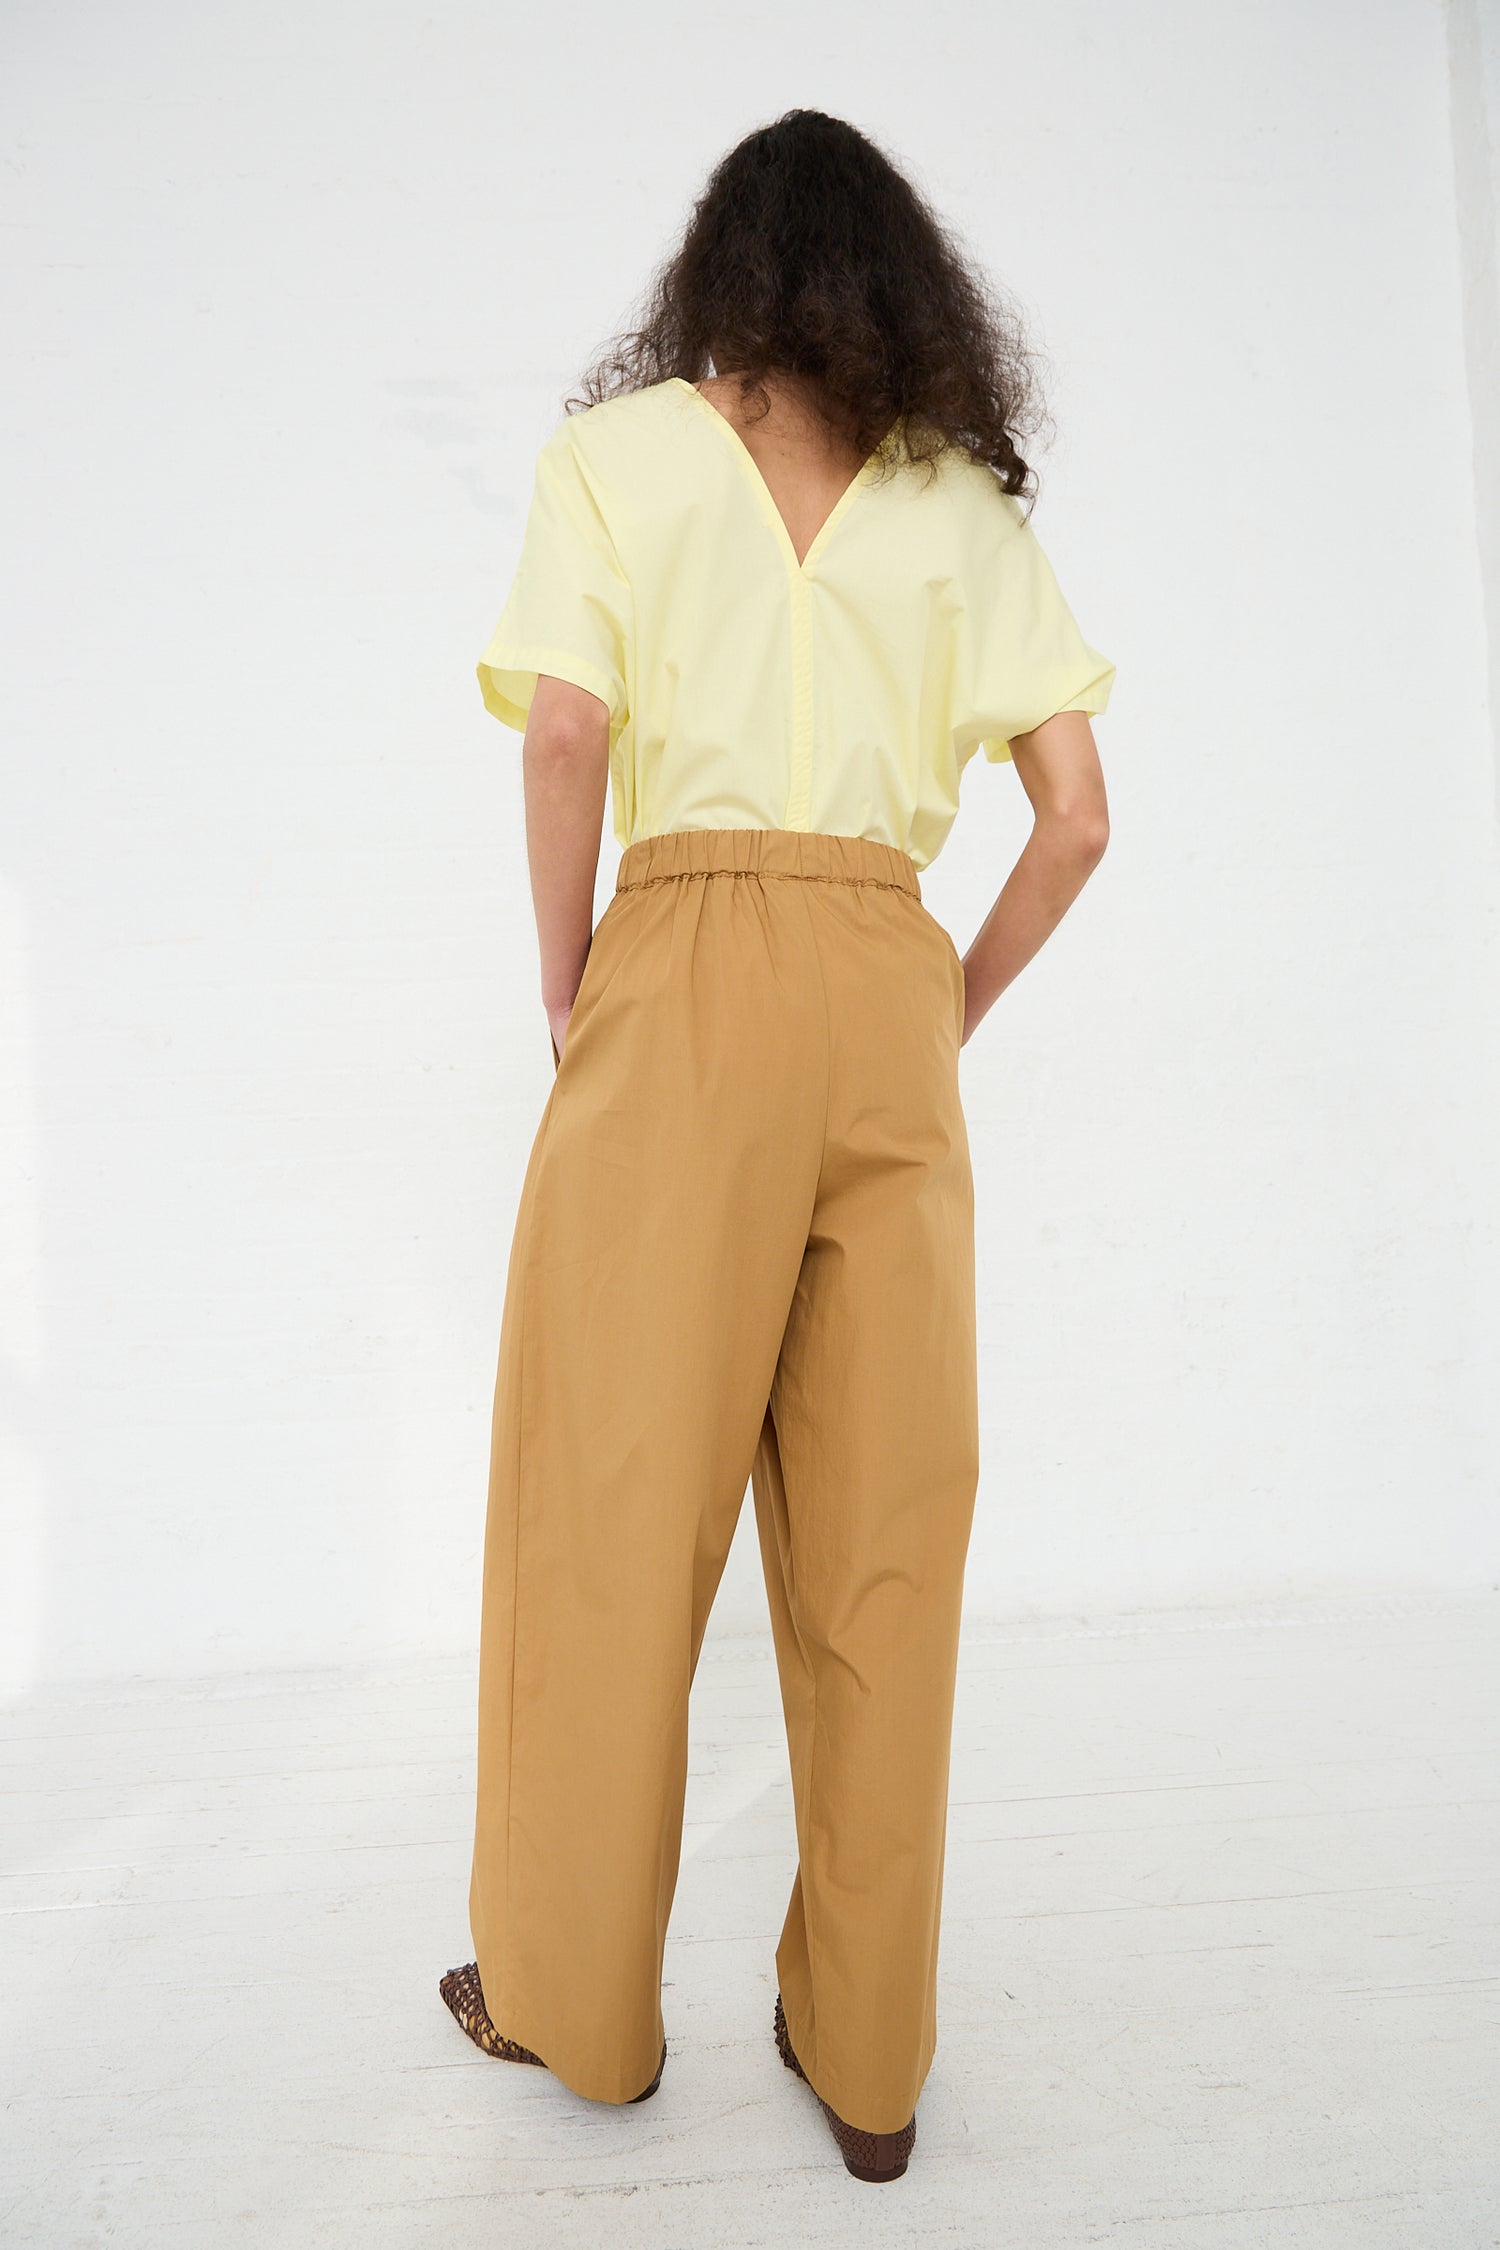 Woman from behind wearing yellow blouse and Black Crane's Organic Cotton Straight Draped Pant in Camel, standing against a white background.